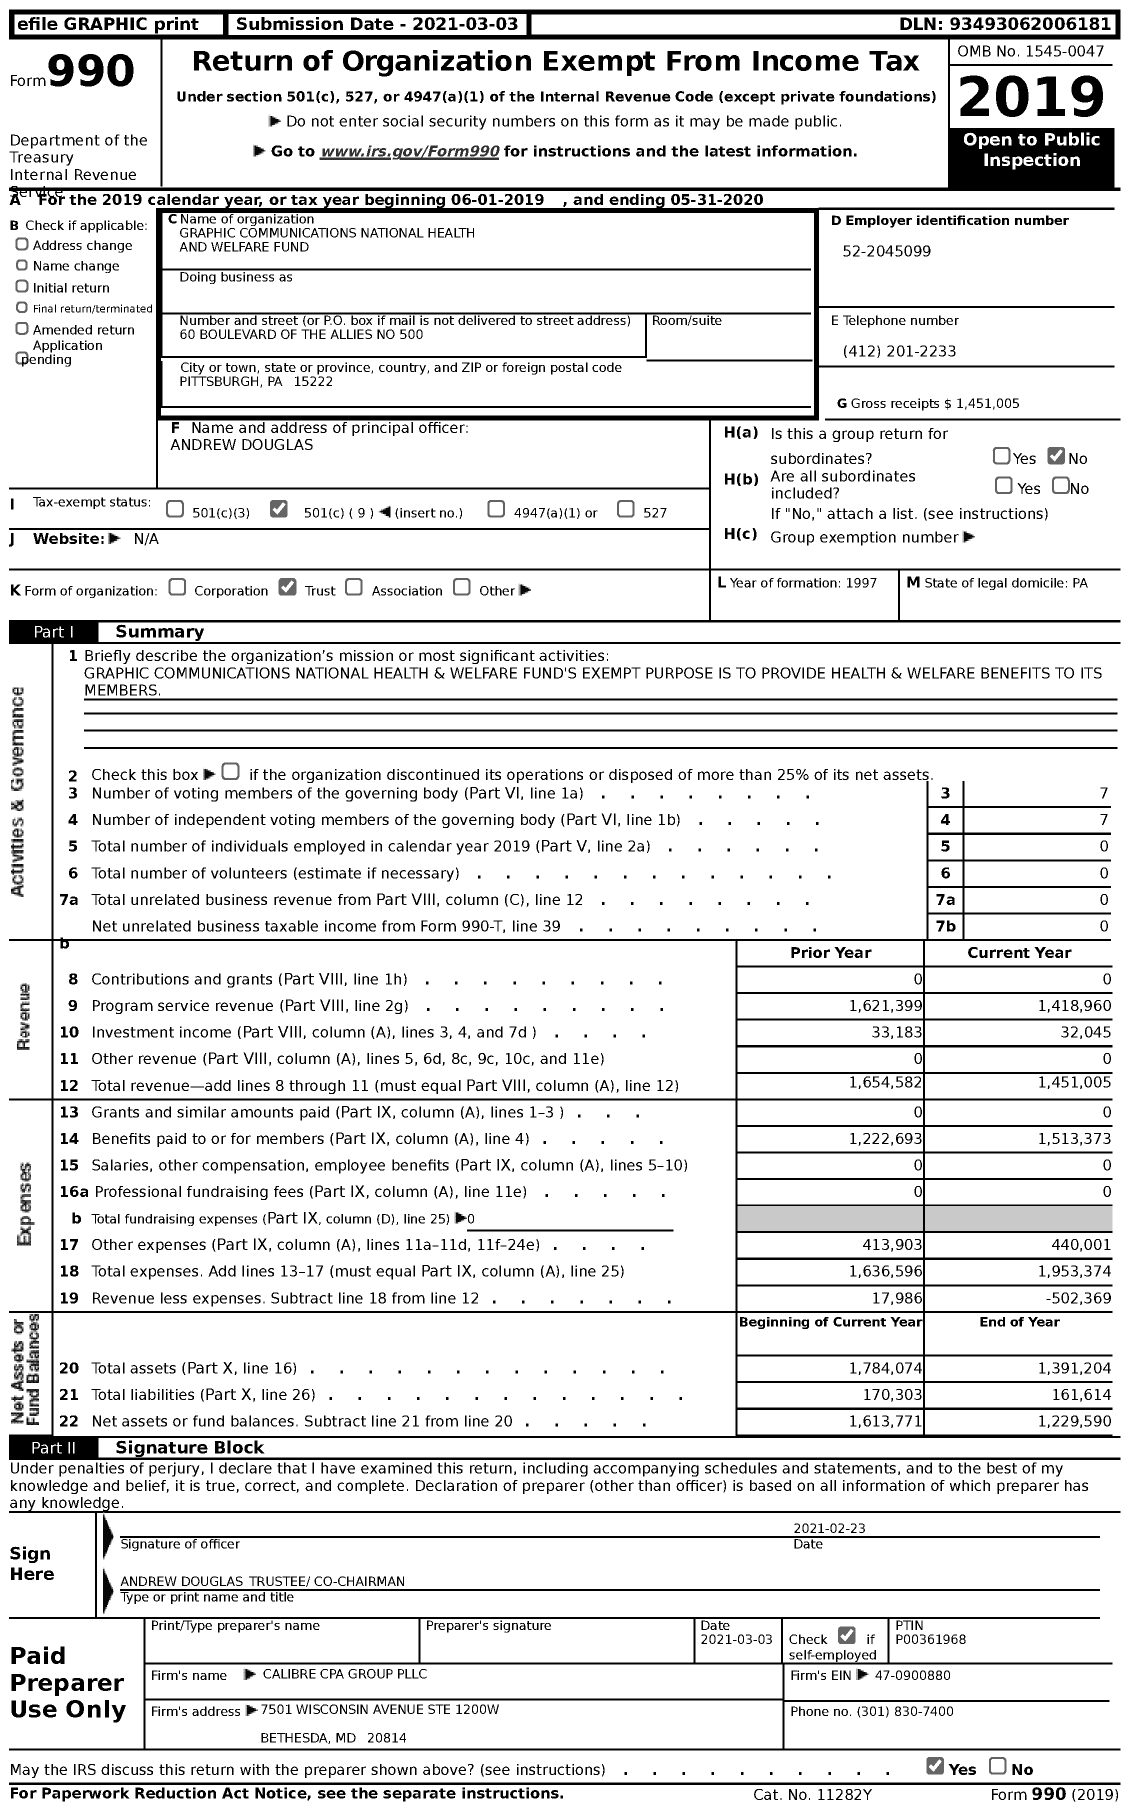 Image of first page of 2019 Form 990 for Graphic Communications National Health and Welfare Fund